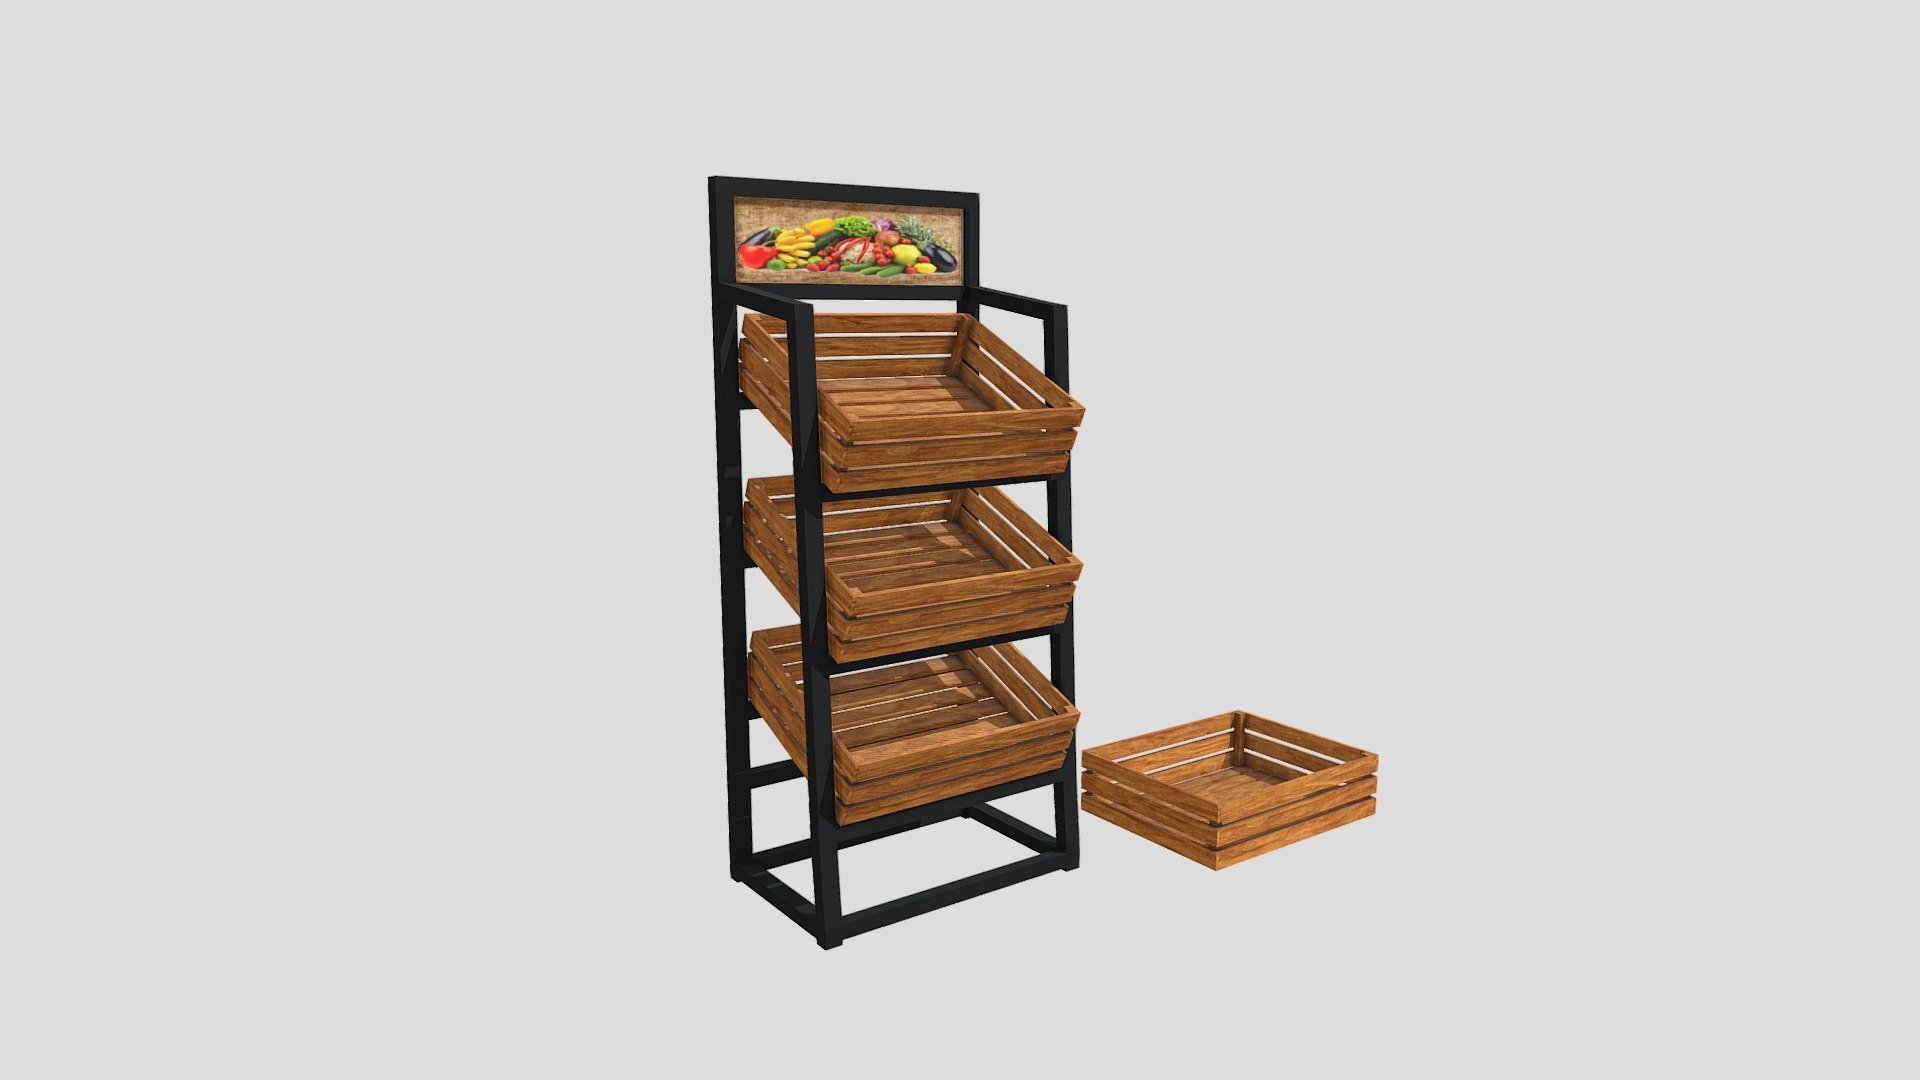 Fruit shelf - fruit boxes

Obj, Fbx, Dae, mtl, Glb, Stl ,Blend and texture (rar) file formats.

Polygons: 1352 Vertices :944.

All formats tested and working.

Assets are low poly.

Assets are fully textured (PBR), 2048x2048 .png's.

All formats tested and working.

The models are polygonal (verts and tris).

UVMapped, Low-poly 3D model.

For ease of use, objects are named logically (using the English language).

Face orientation is ok.

When importing, selecting, if necessary, you can change the size of the model.

The package includes texture and uv mapping.

Basecolor Map, Metallic Map, Roughness Map end Normal Map.

This part, while simple, has been tested with confidence and peace of mind that it can be downloaded 3d model